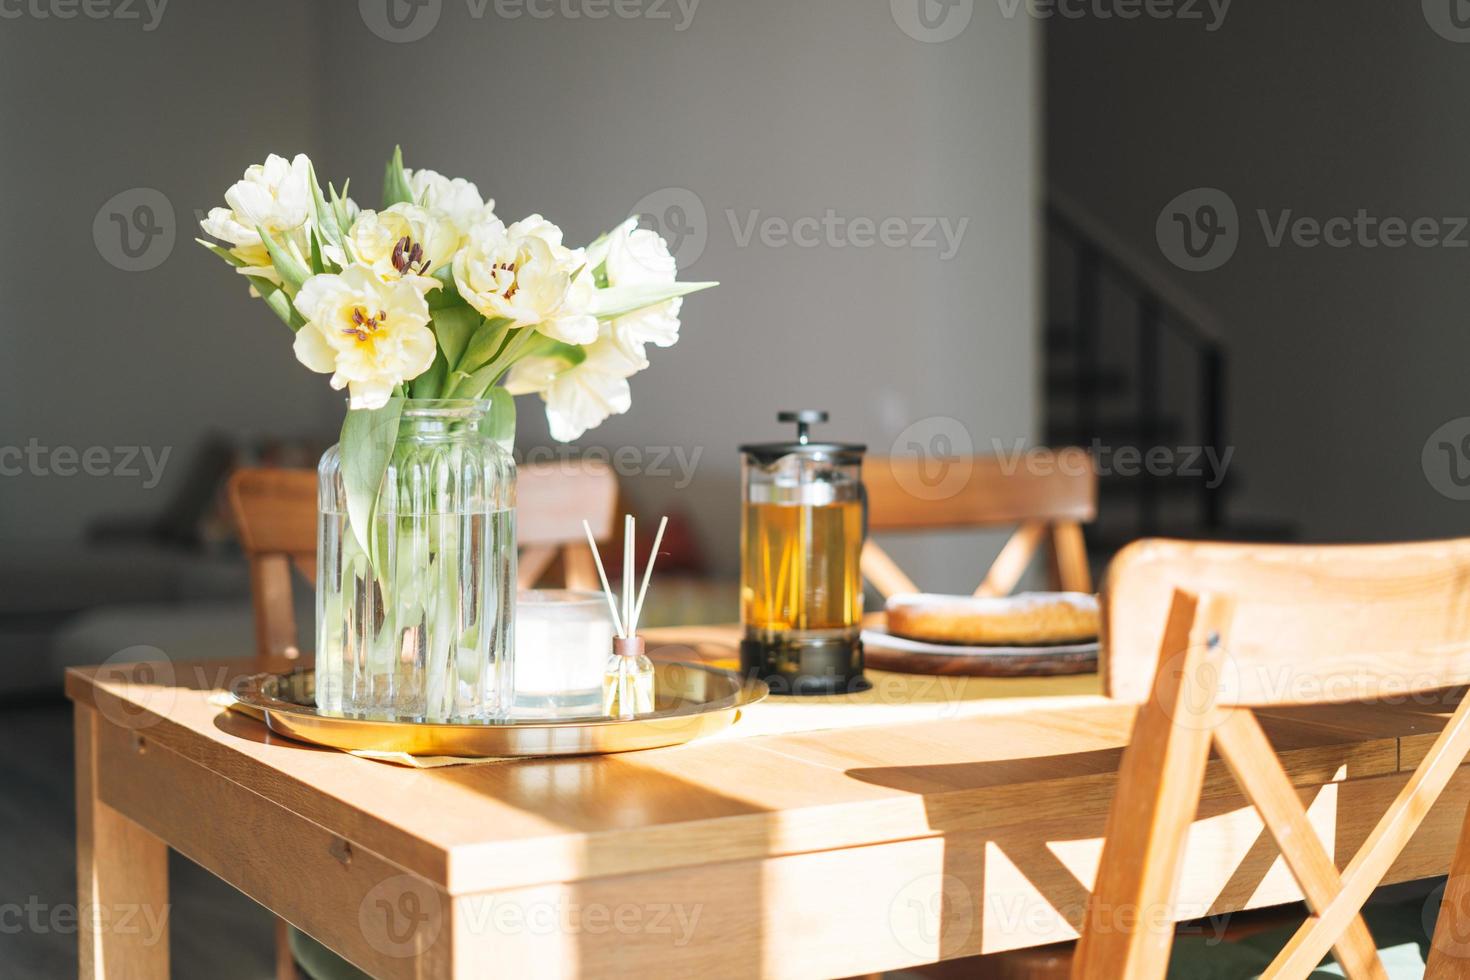 https://static.vecteezy.com/system/resources/previews/016/688/254/non_2x/beautiful-bouquet-of-yellow-tulips-in-vase-on-dinner-table-in-white-kitchen-light-interior-at-the-home-photo.jpg